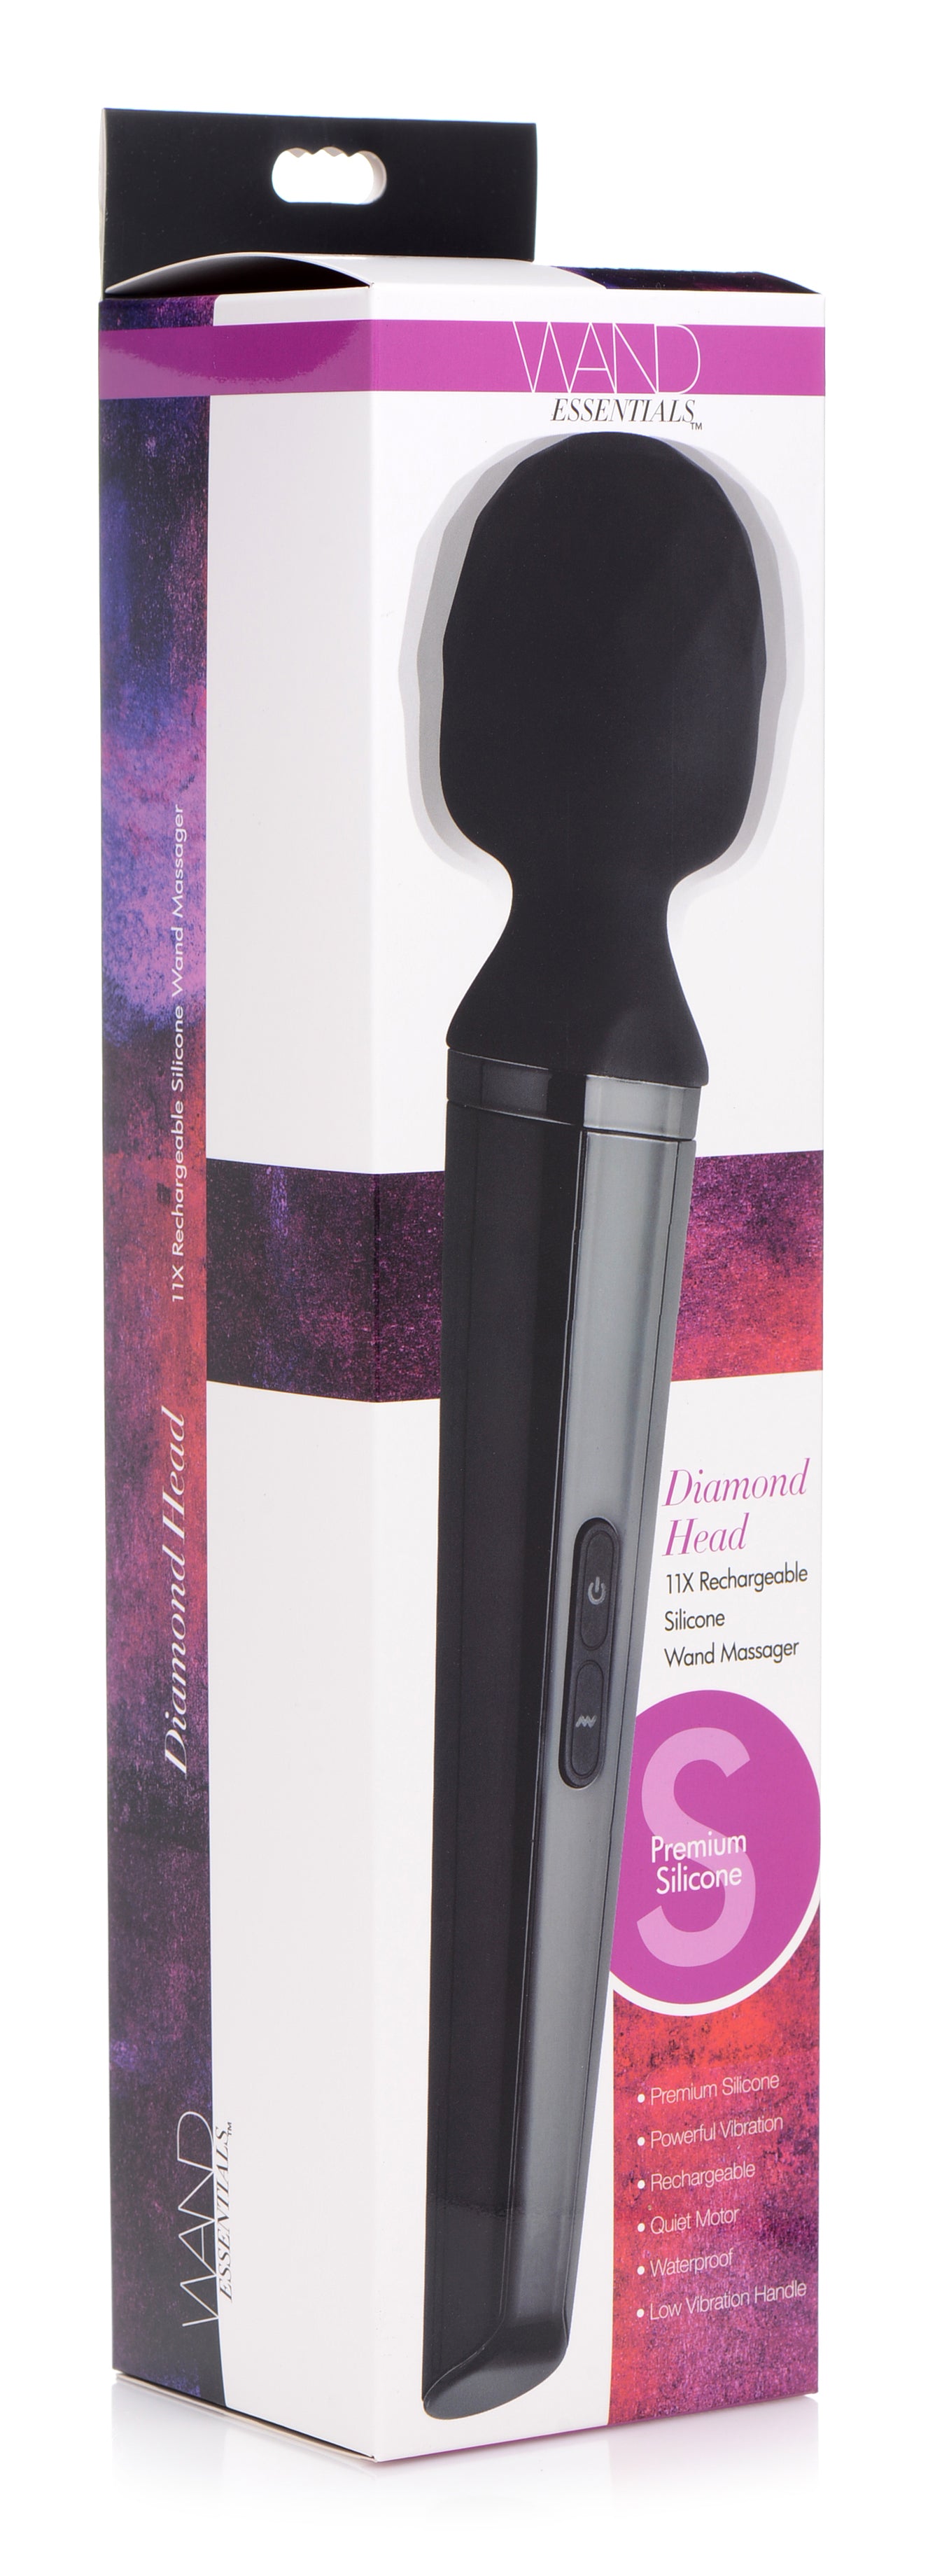 Diamond Head 24X Rechargeable Silicone Wand Massager - UABDSM